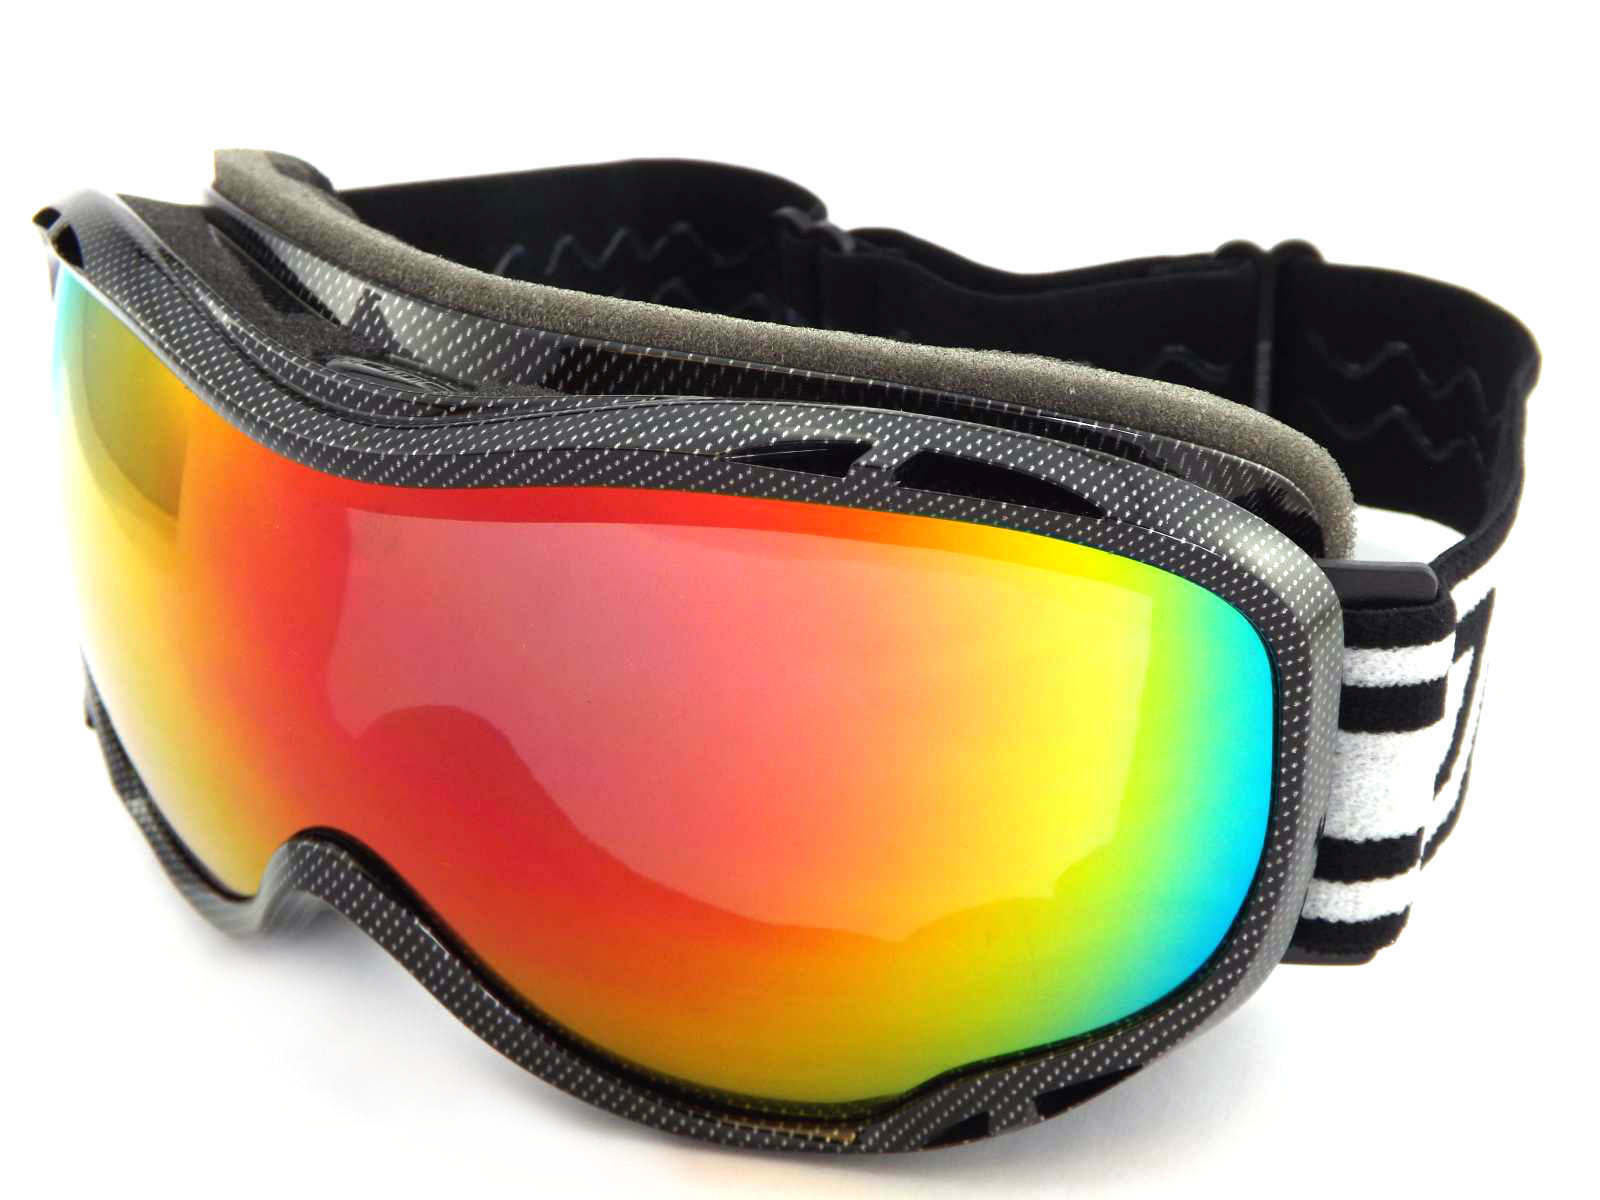 shop DIRTY DOG BUG Popular shop is the lowest price challenge Ski Snowboard Goggles L Red Fusion Carbon MIRROR